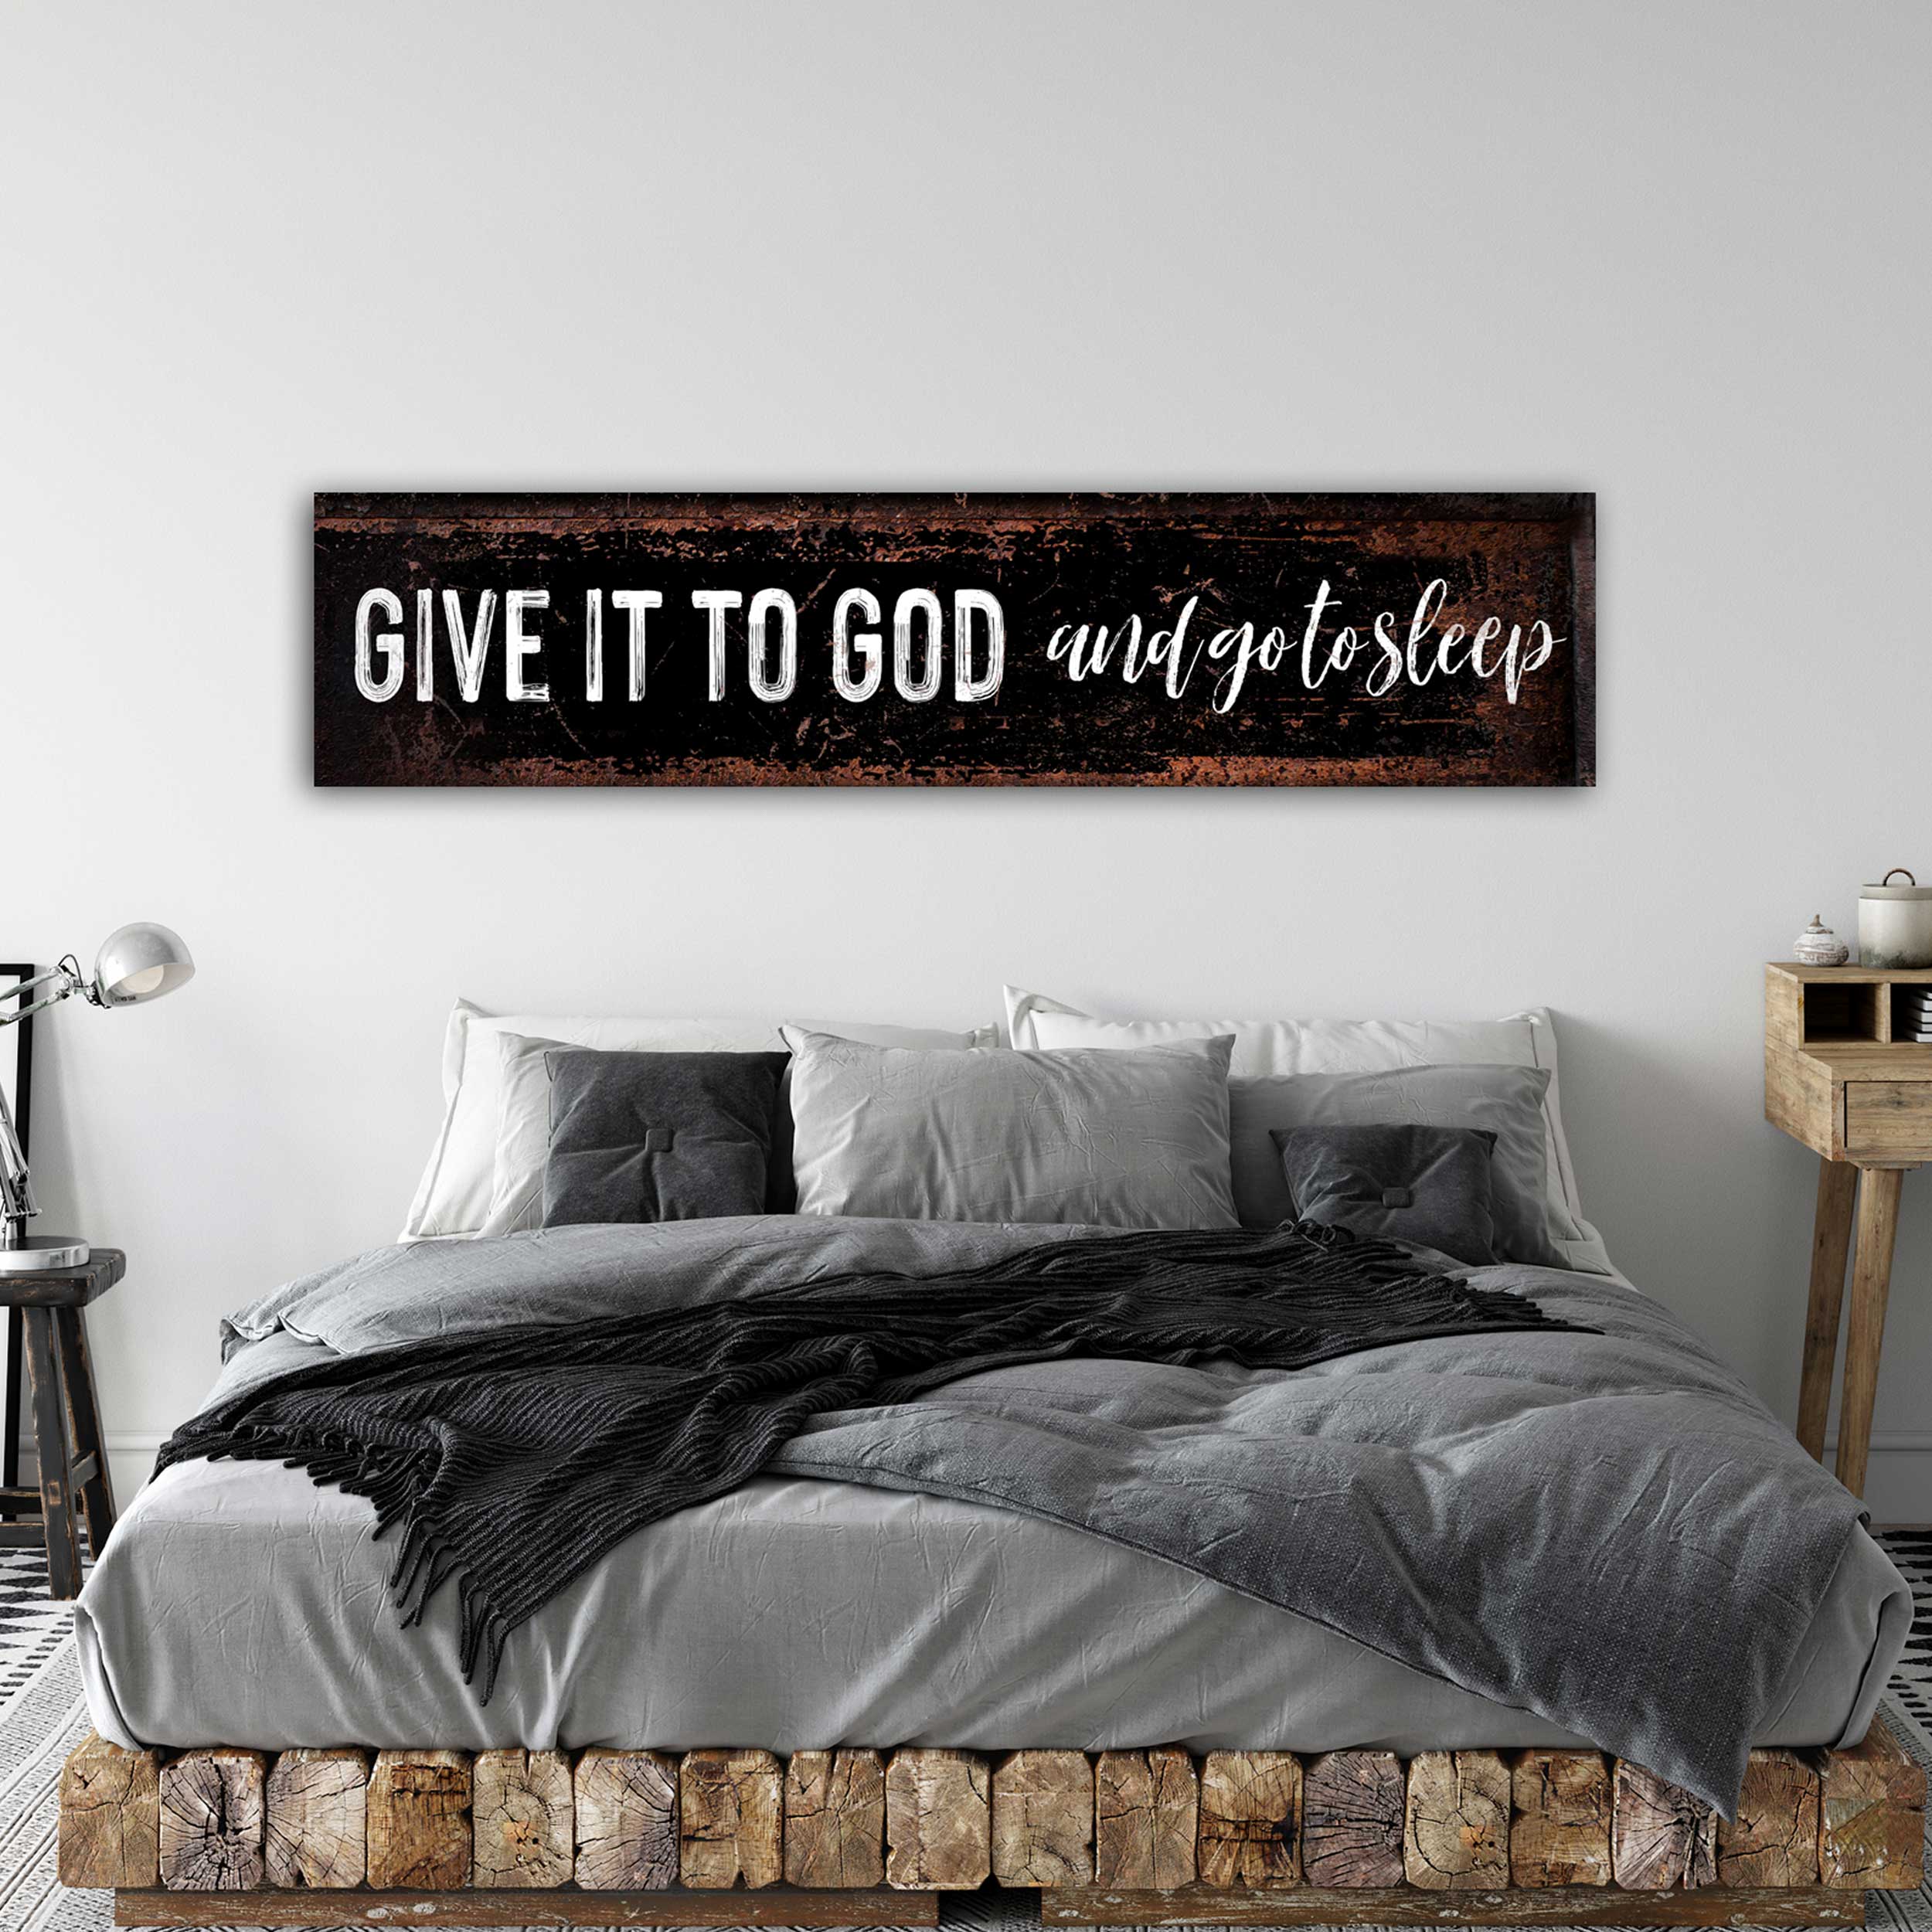 Give it to God and go to sleep sign with white letters on distressed black canvas.